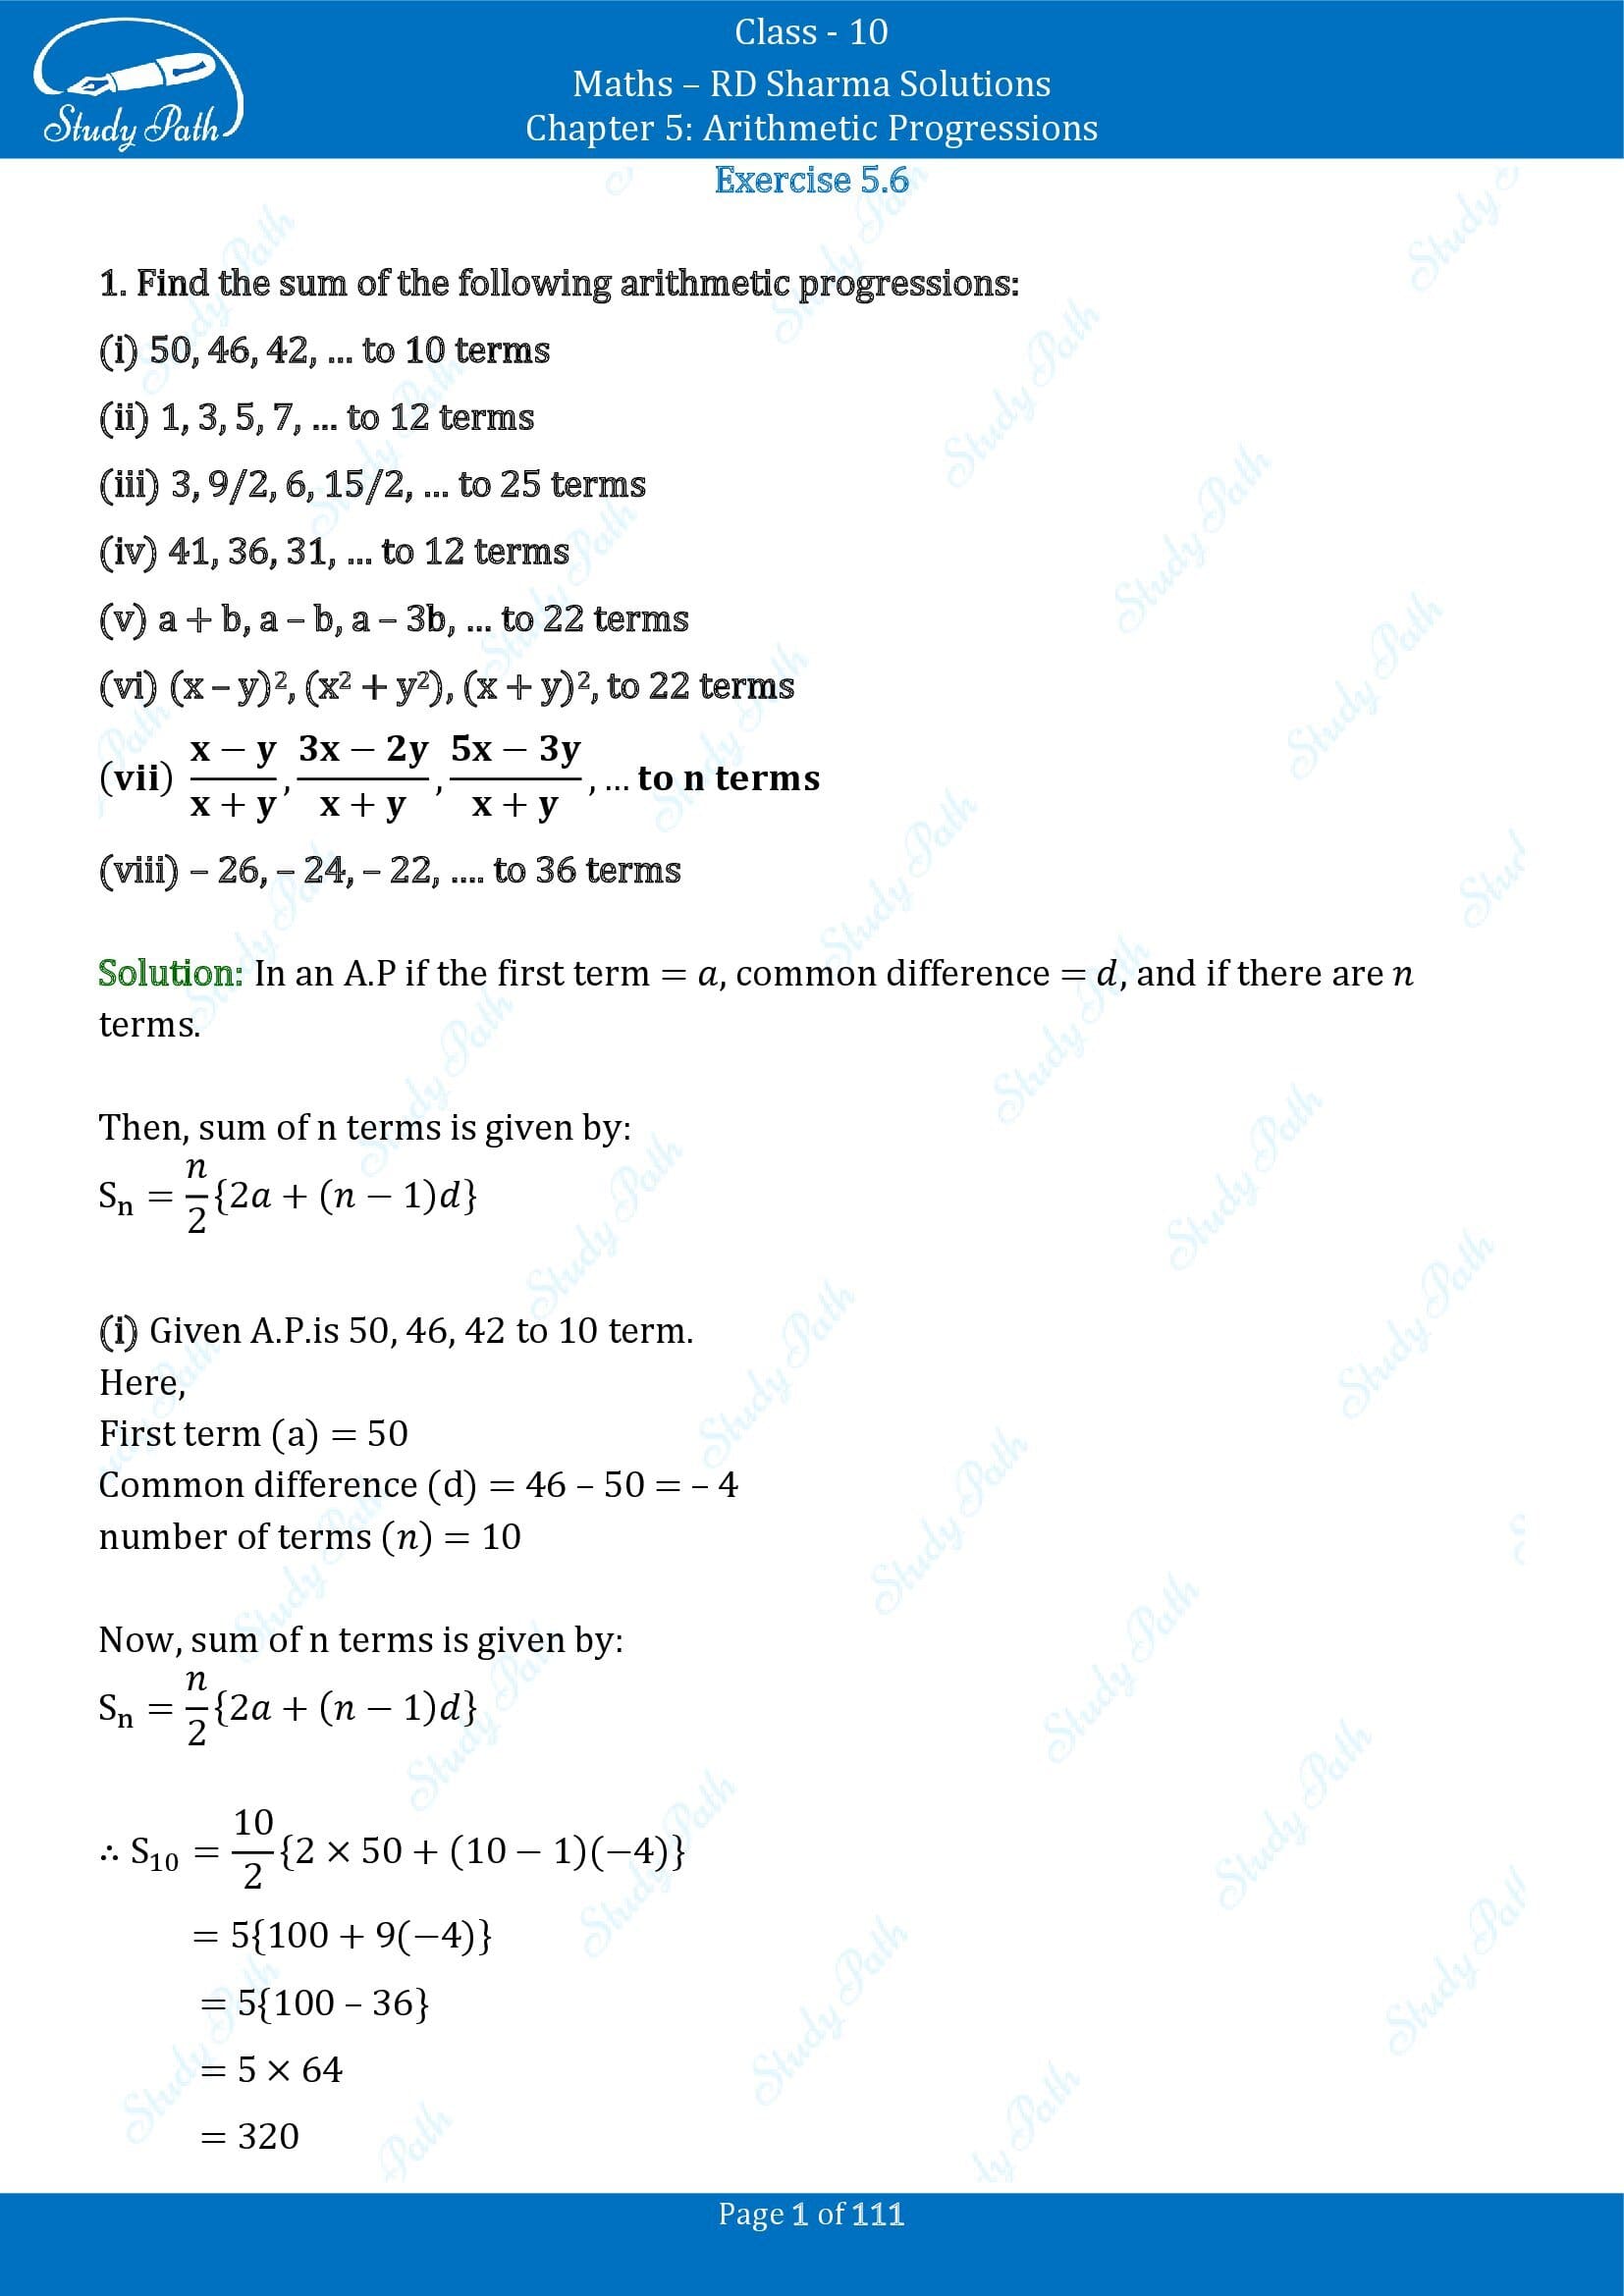 RD Sharma Solutions Class 10 Chapter 5 Arithmetic Progressions Exercise 5.6 00001